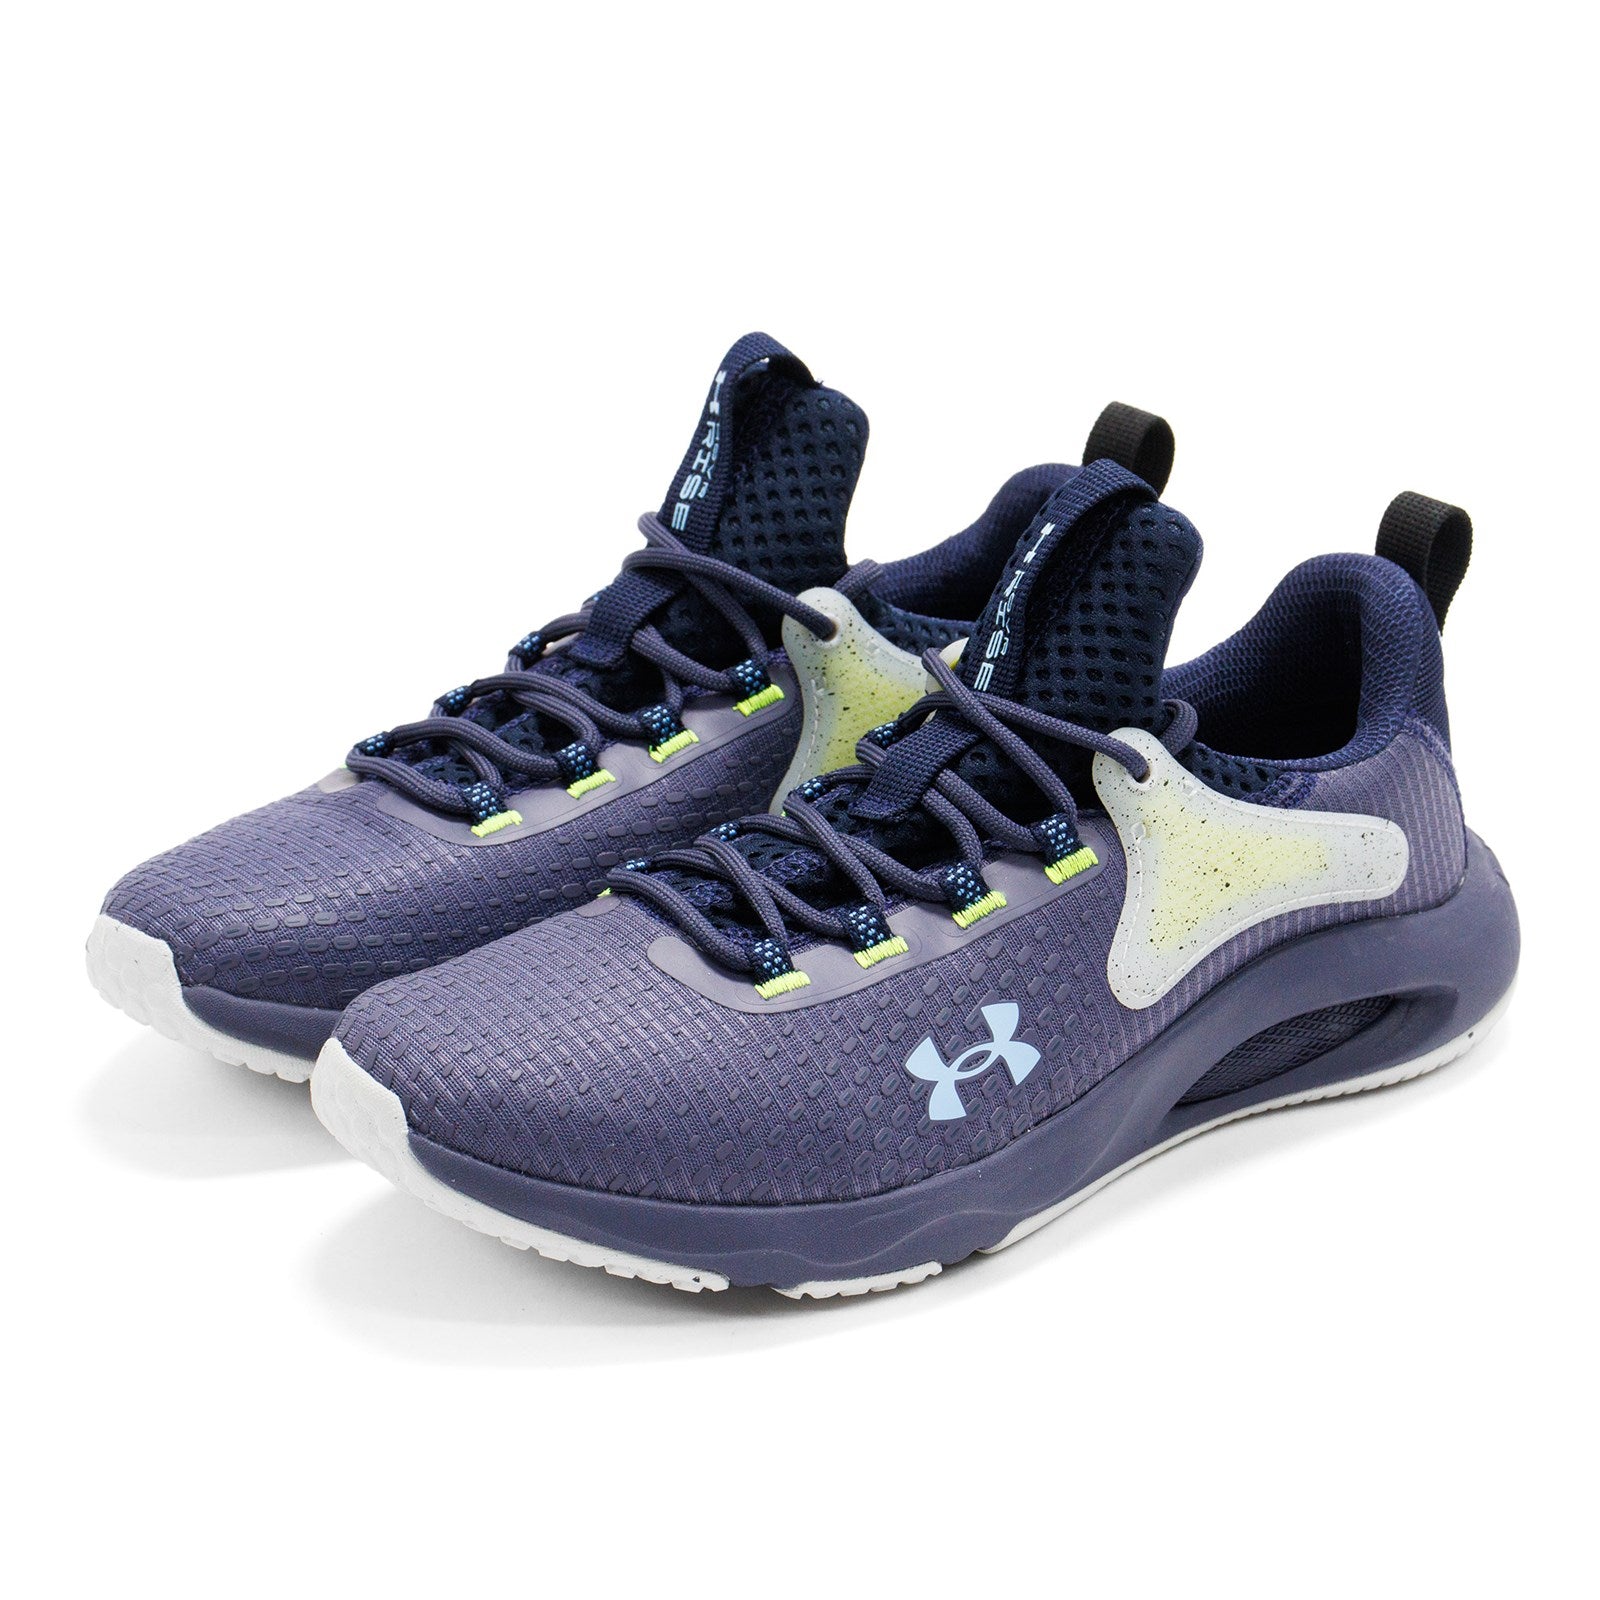 Under Armour Men Hovr Rise 4 Training Shoes